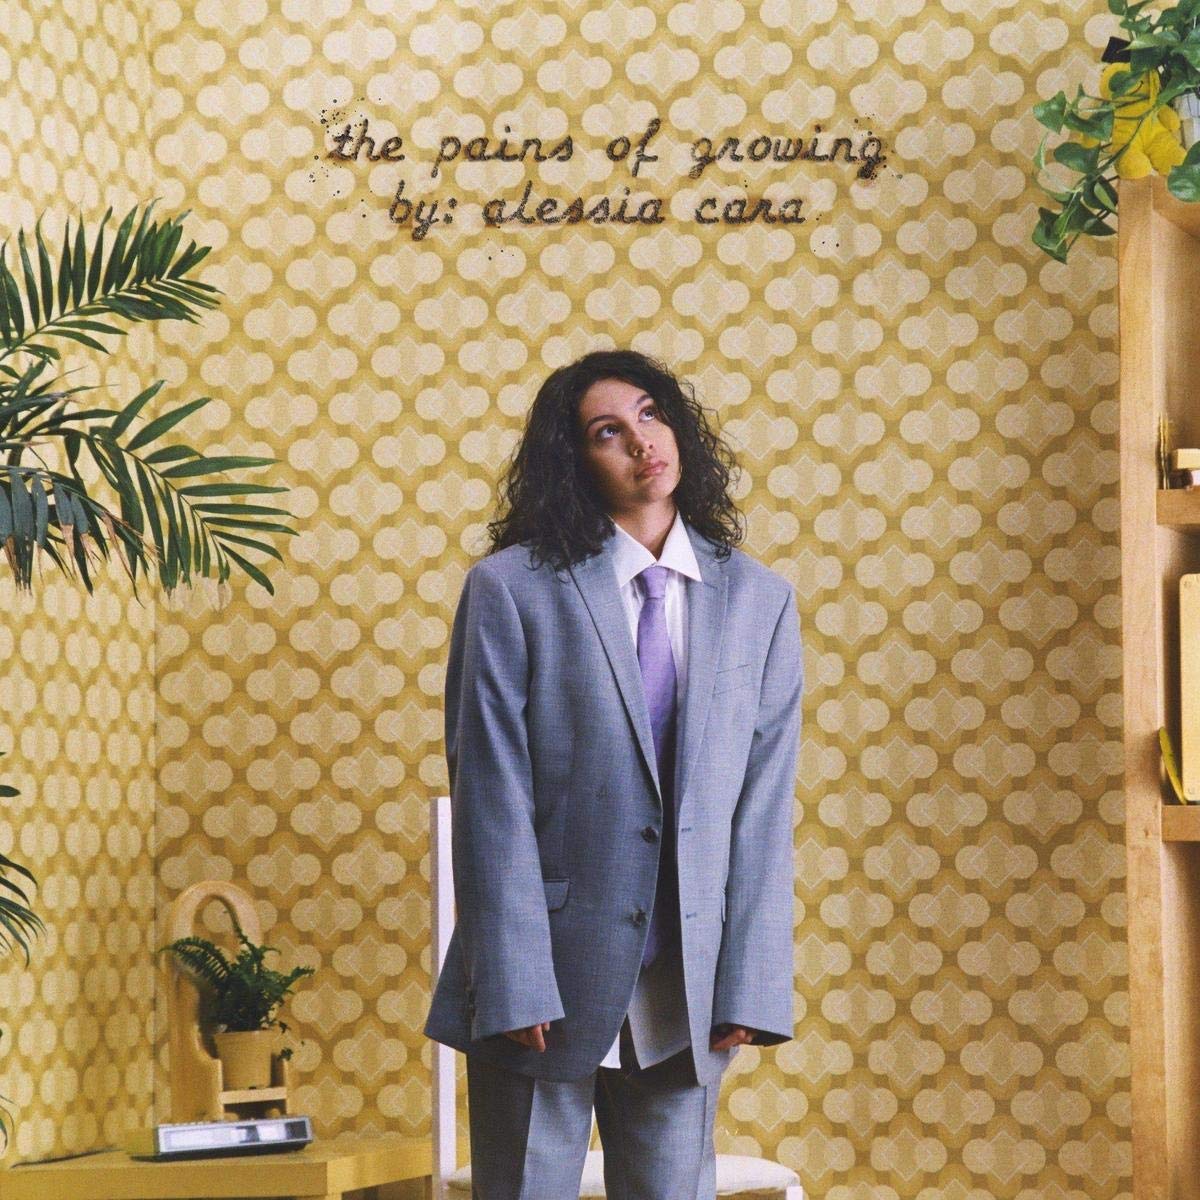 CD Shop - CARA ALESSIA THE PAINS OF GROWING